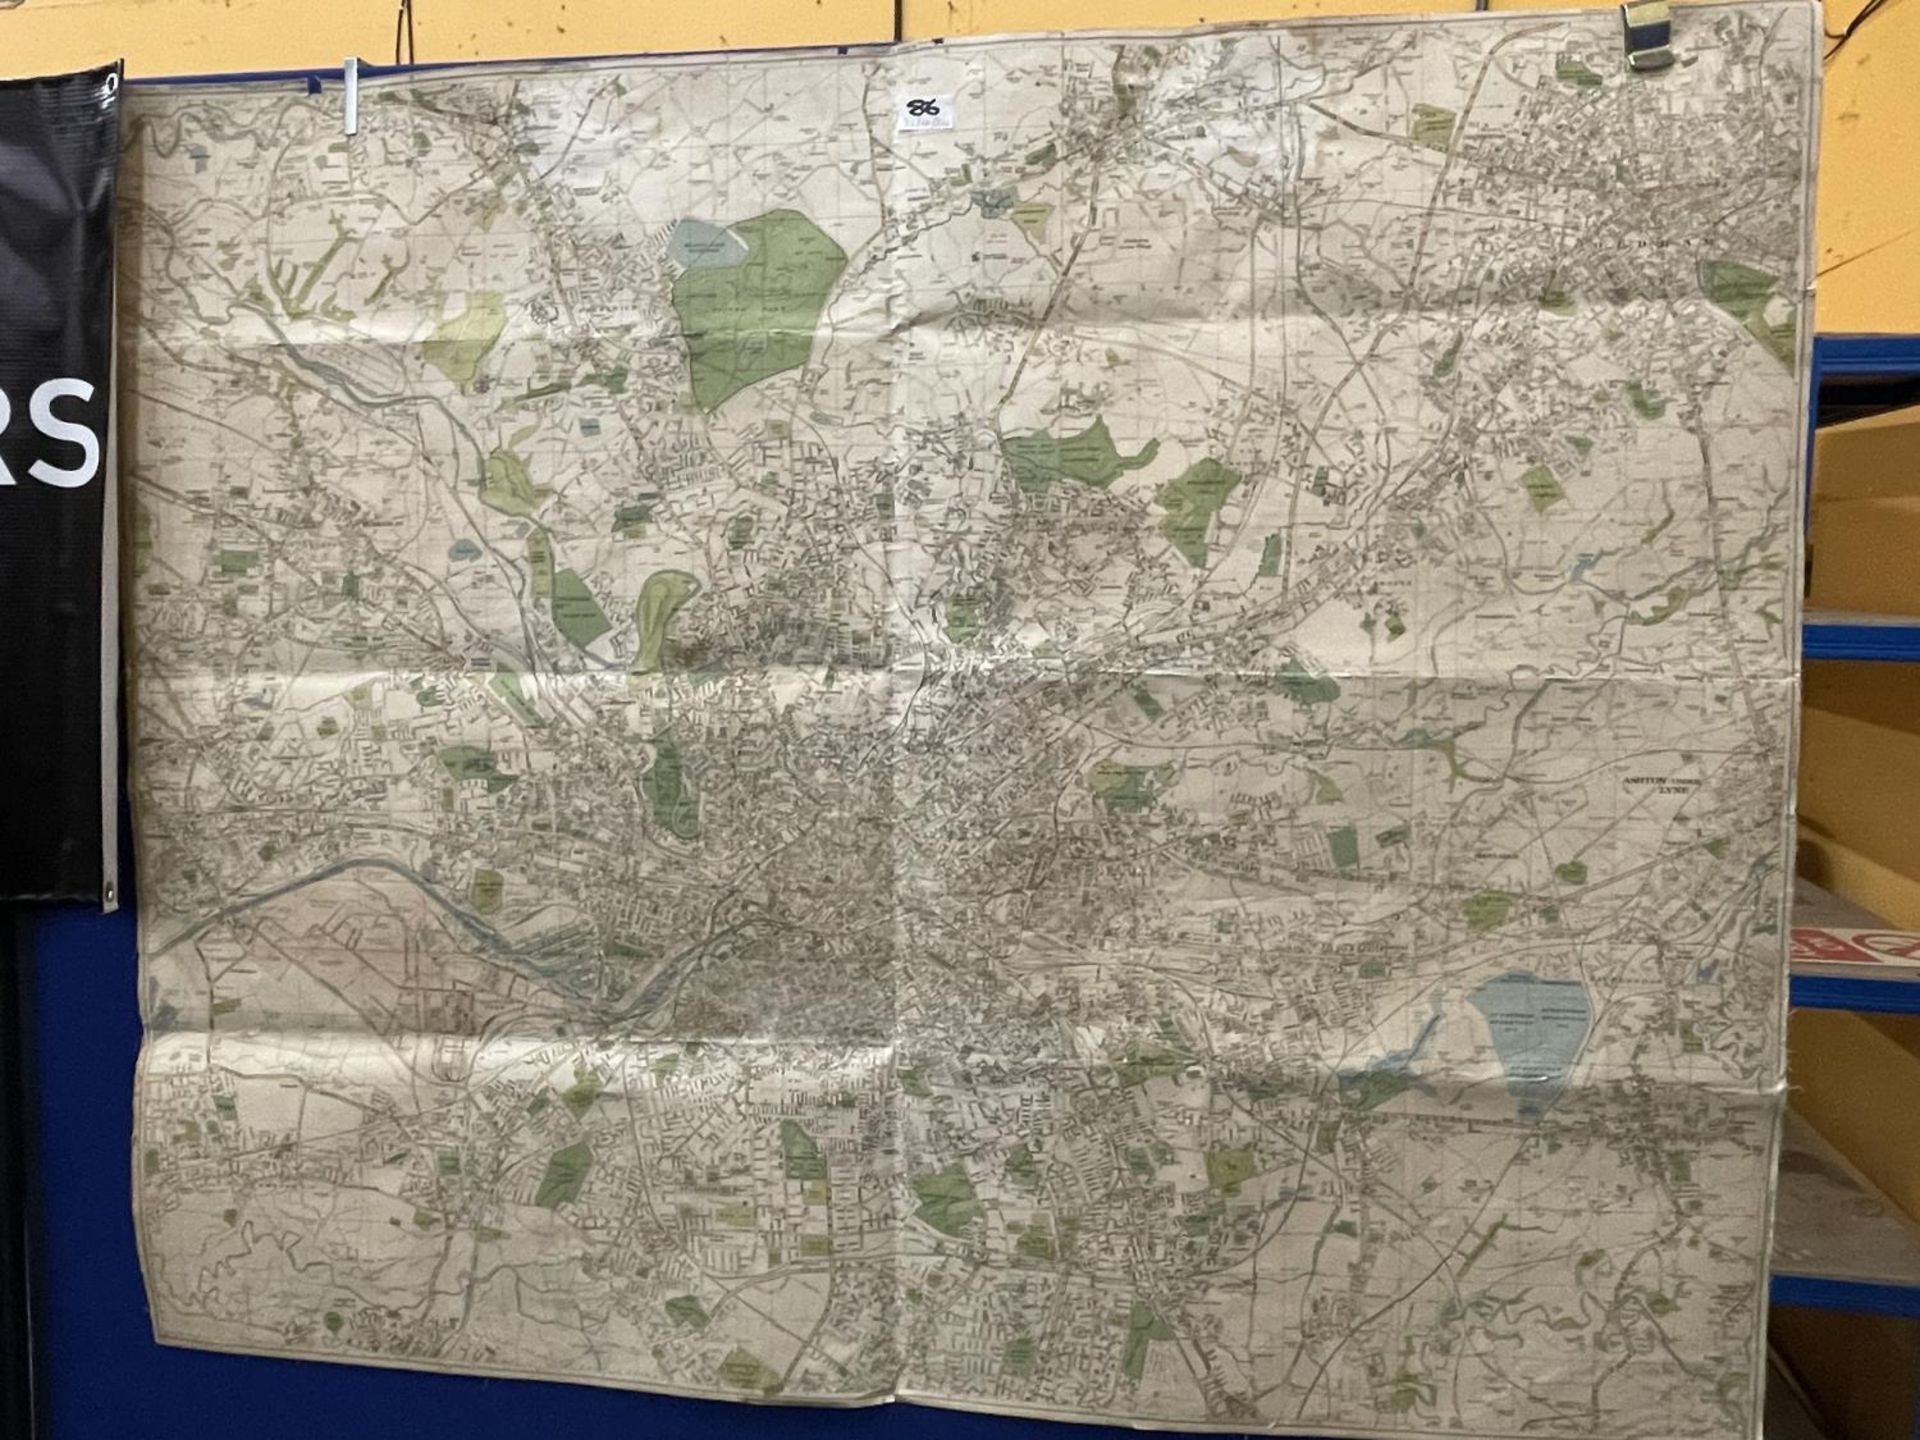 A LARGE VINTAGE MAP OF MANCHESTER AND THE SURROUNDING AREA